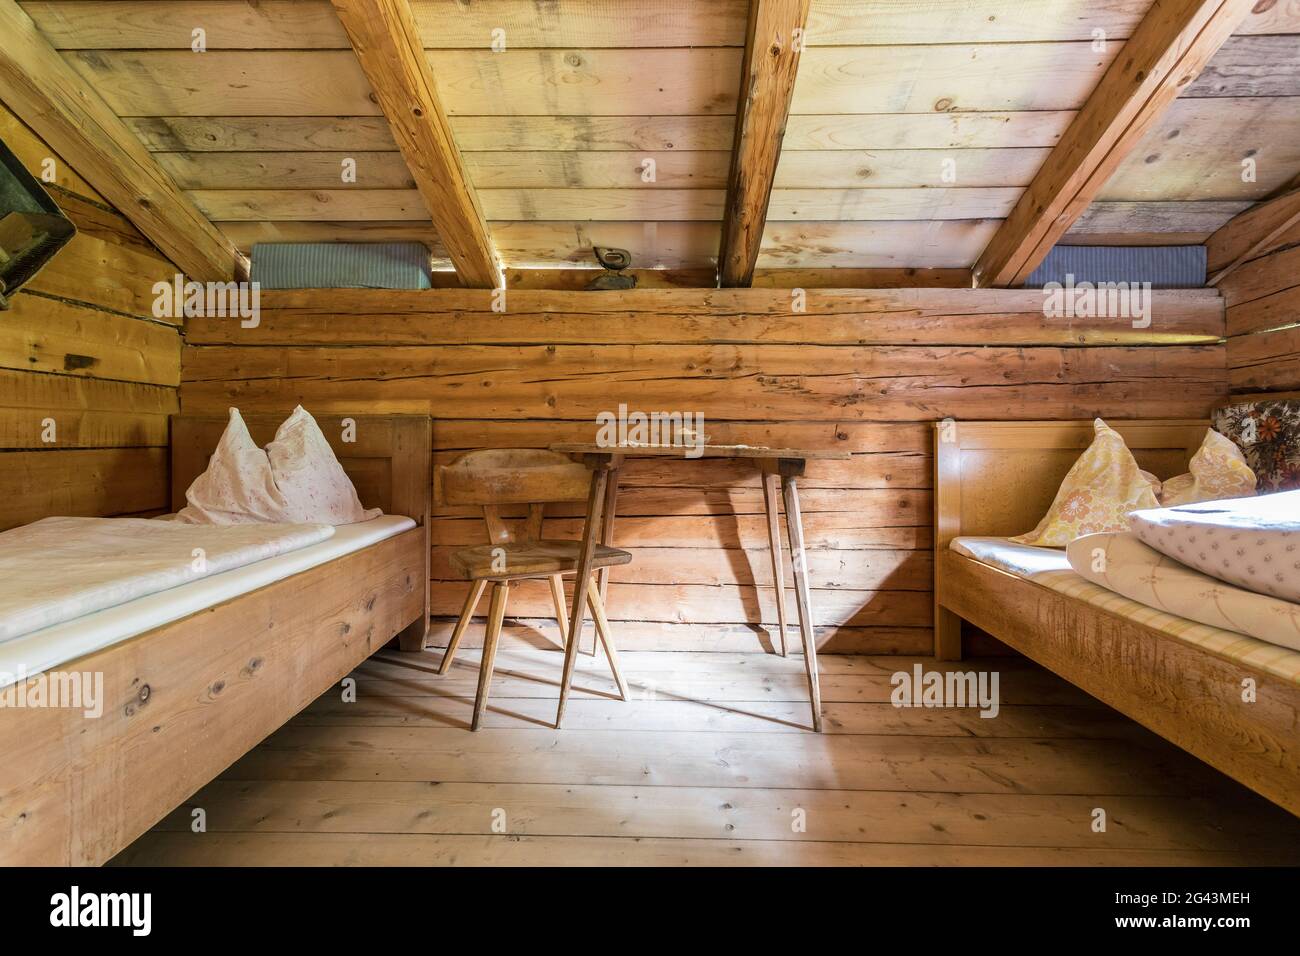 Holiday in the mountains: Rustic old wooden interior of a cabin or alpine hut Stock Photo